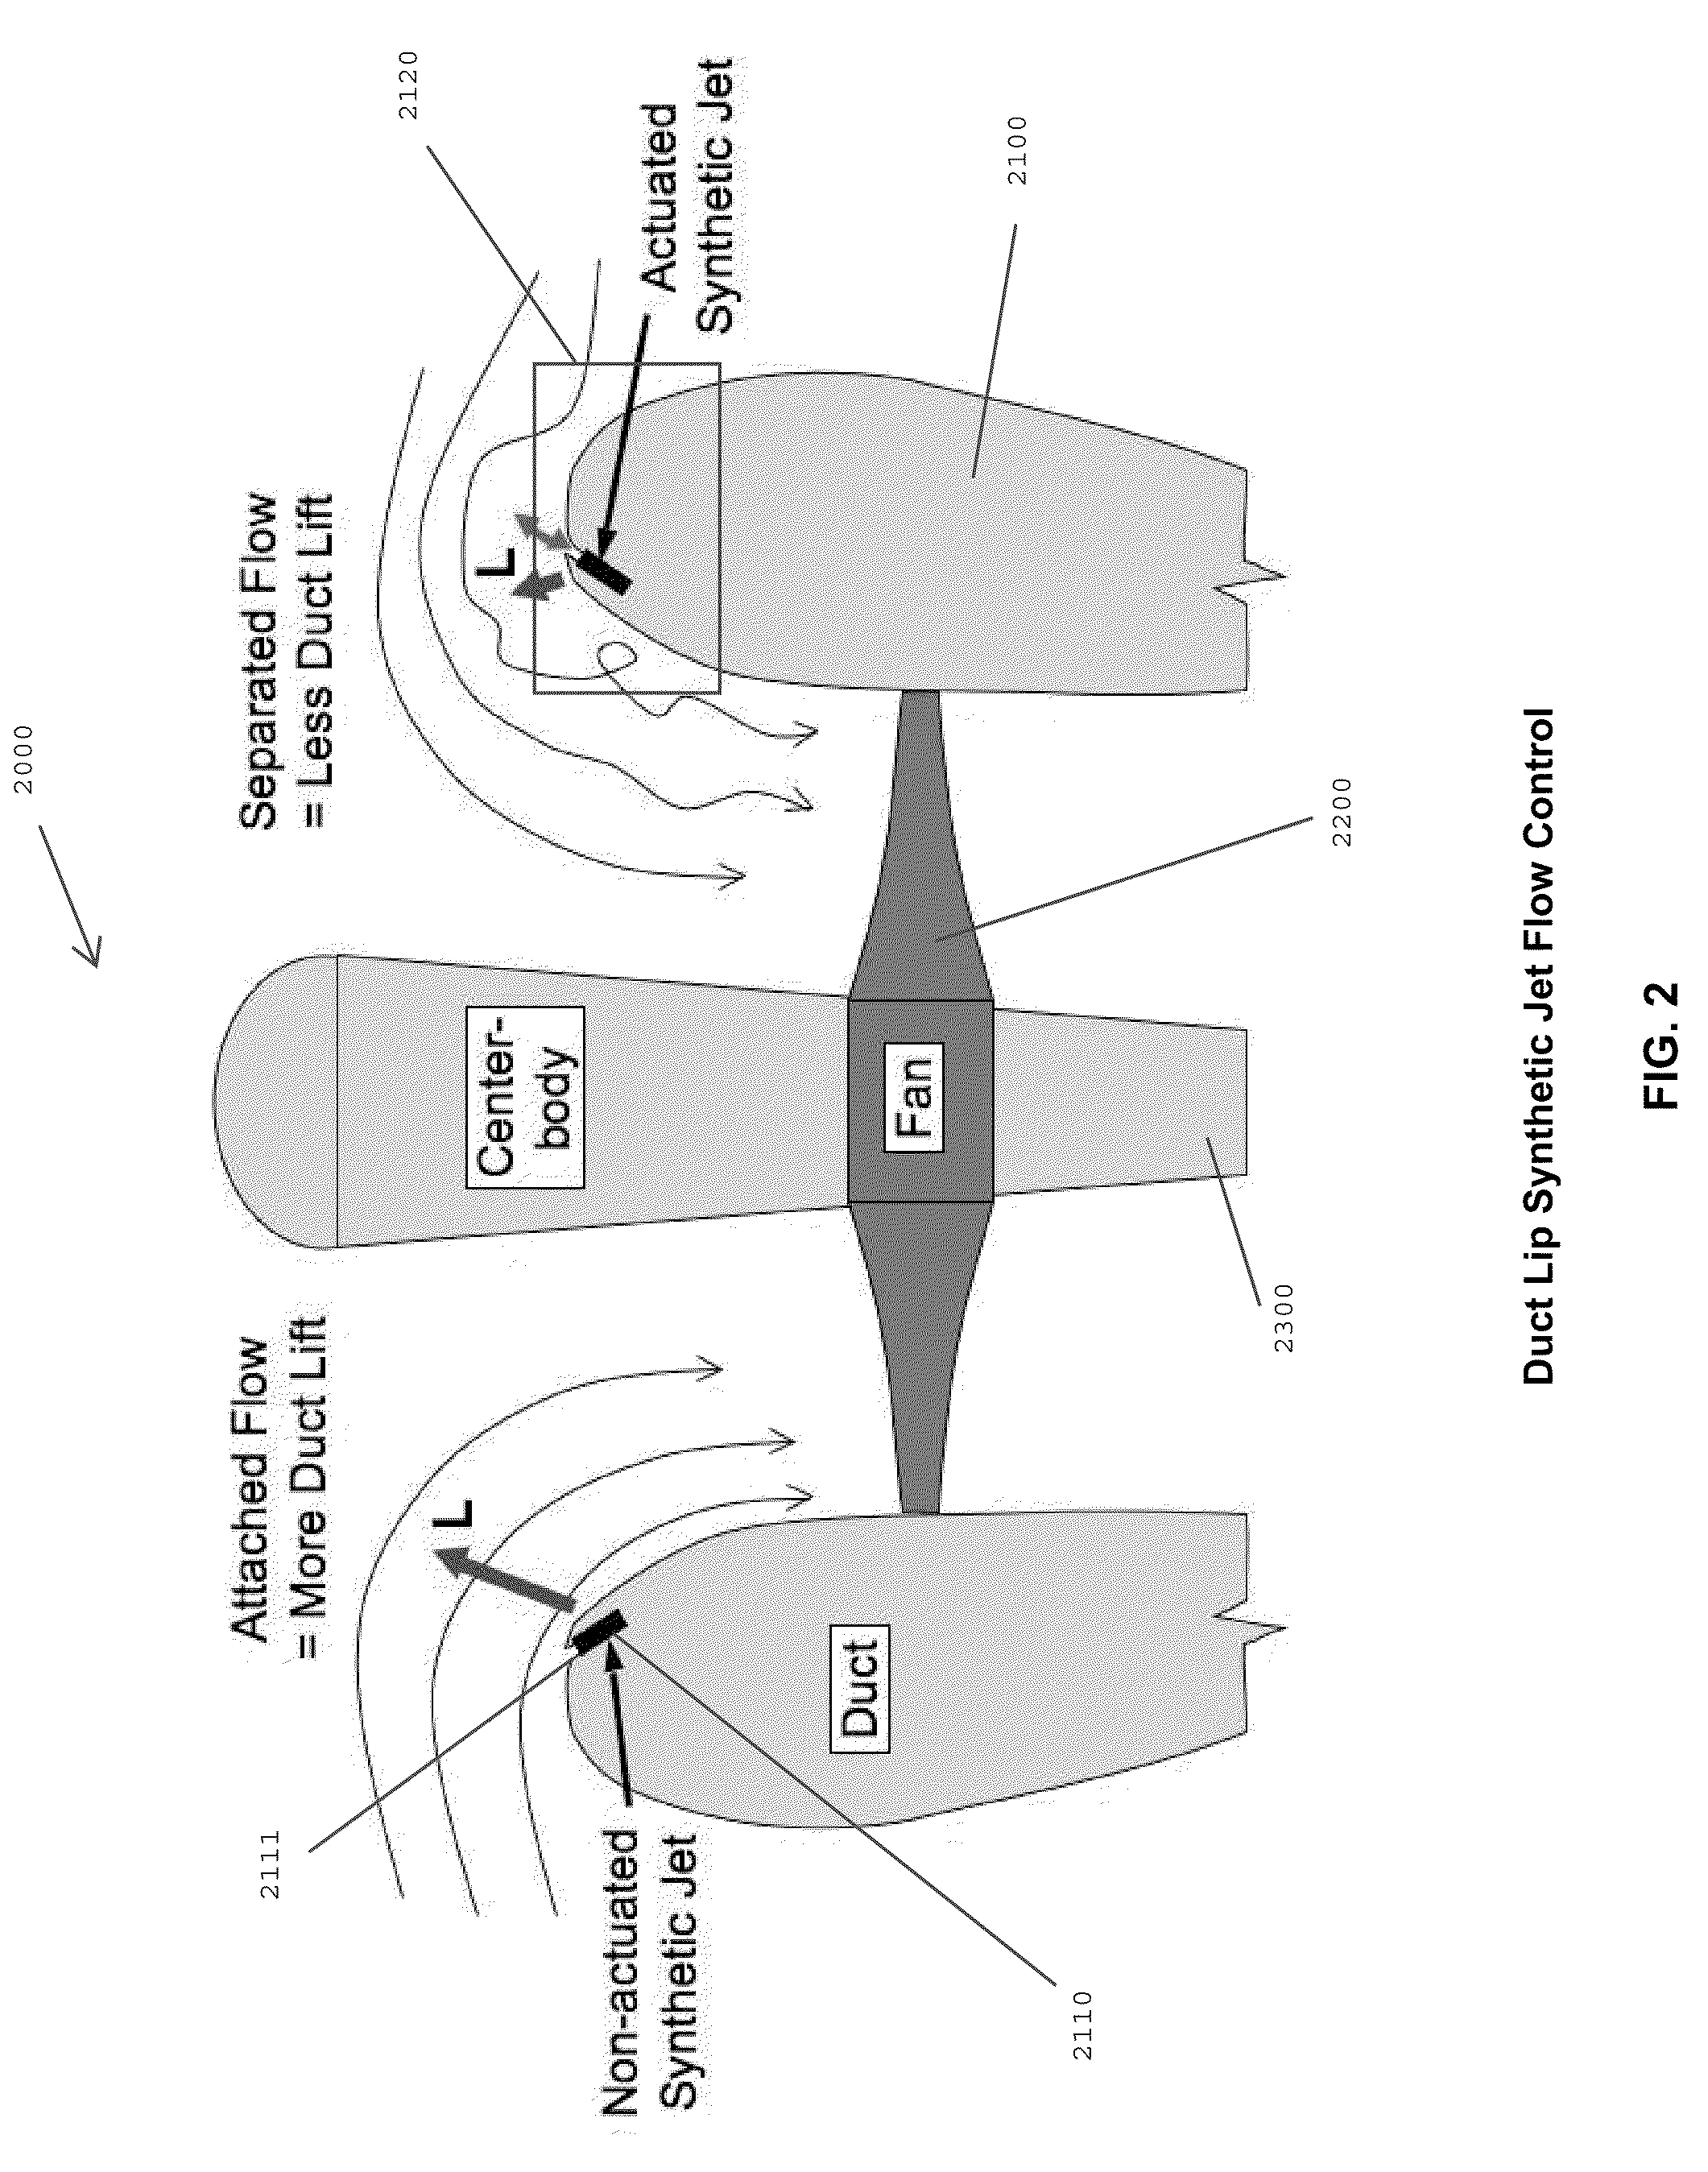 Ducted Fans with Flow Control Synthetic Jet Actuators and Methods for Ducted Fan Force and Moment Control